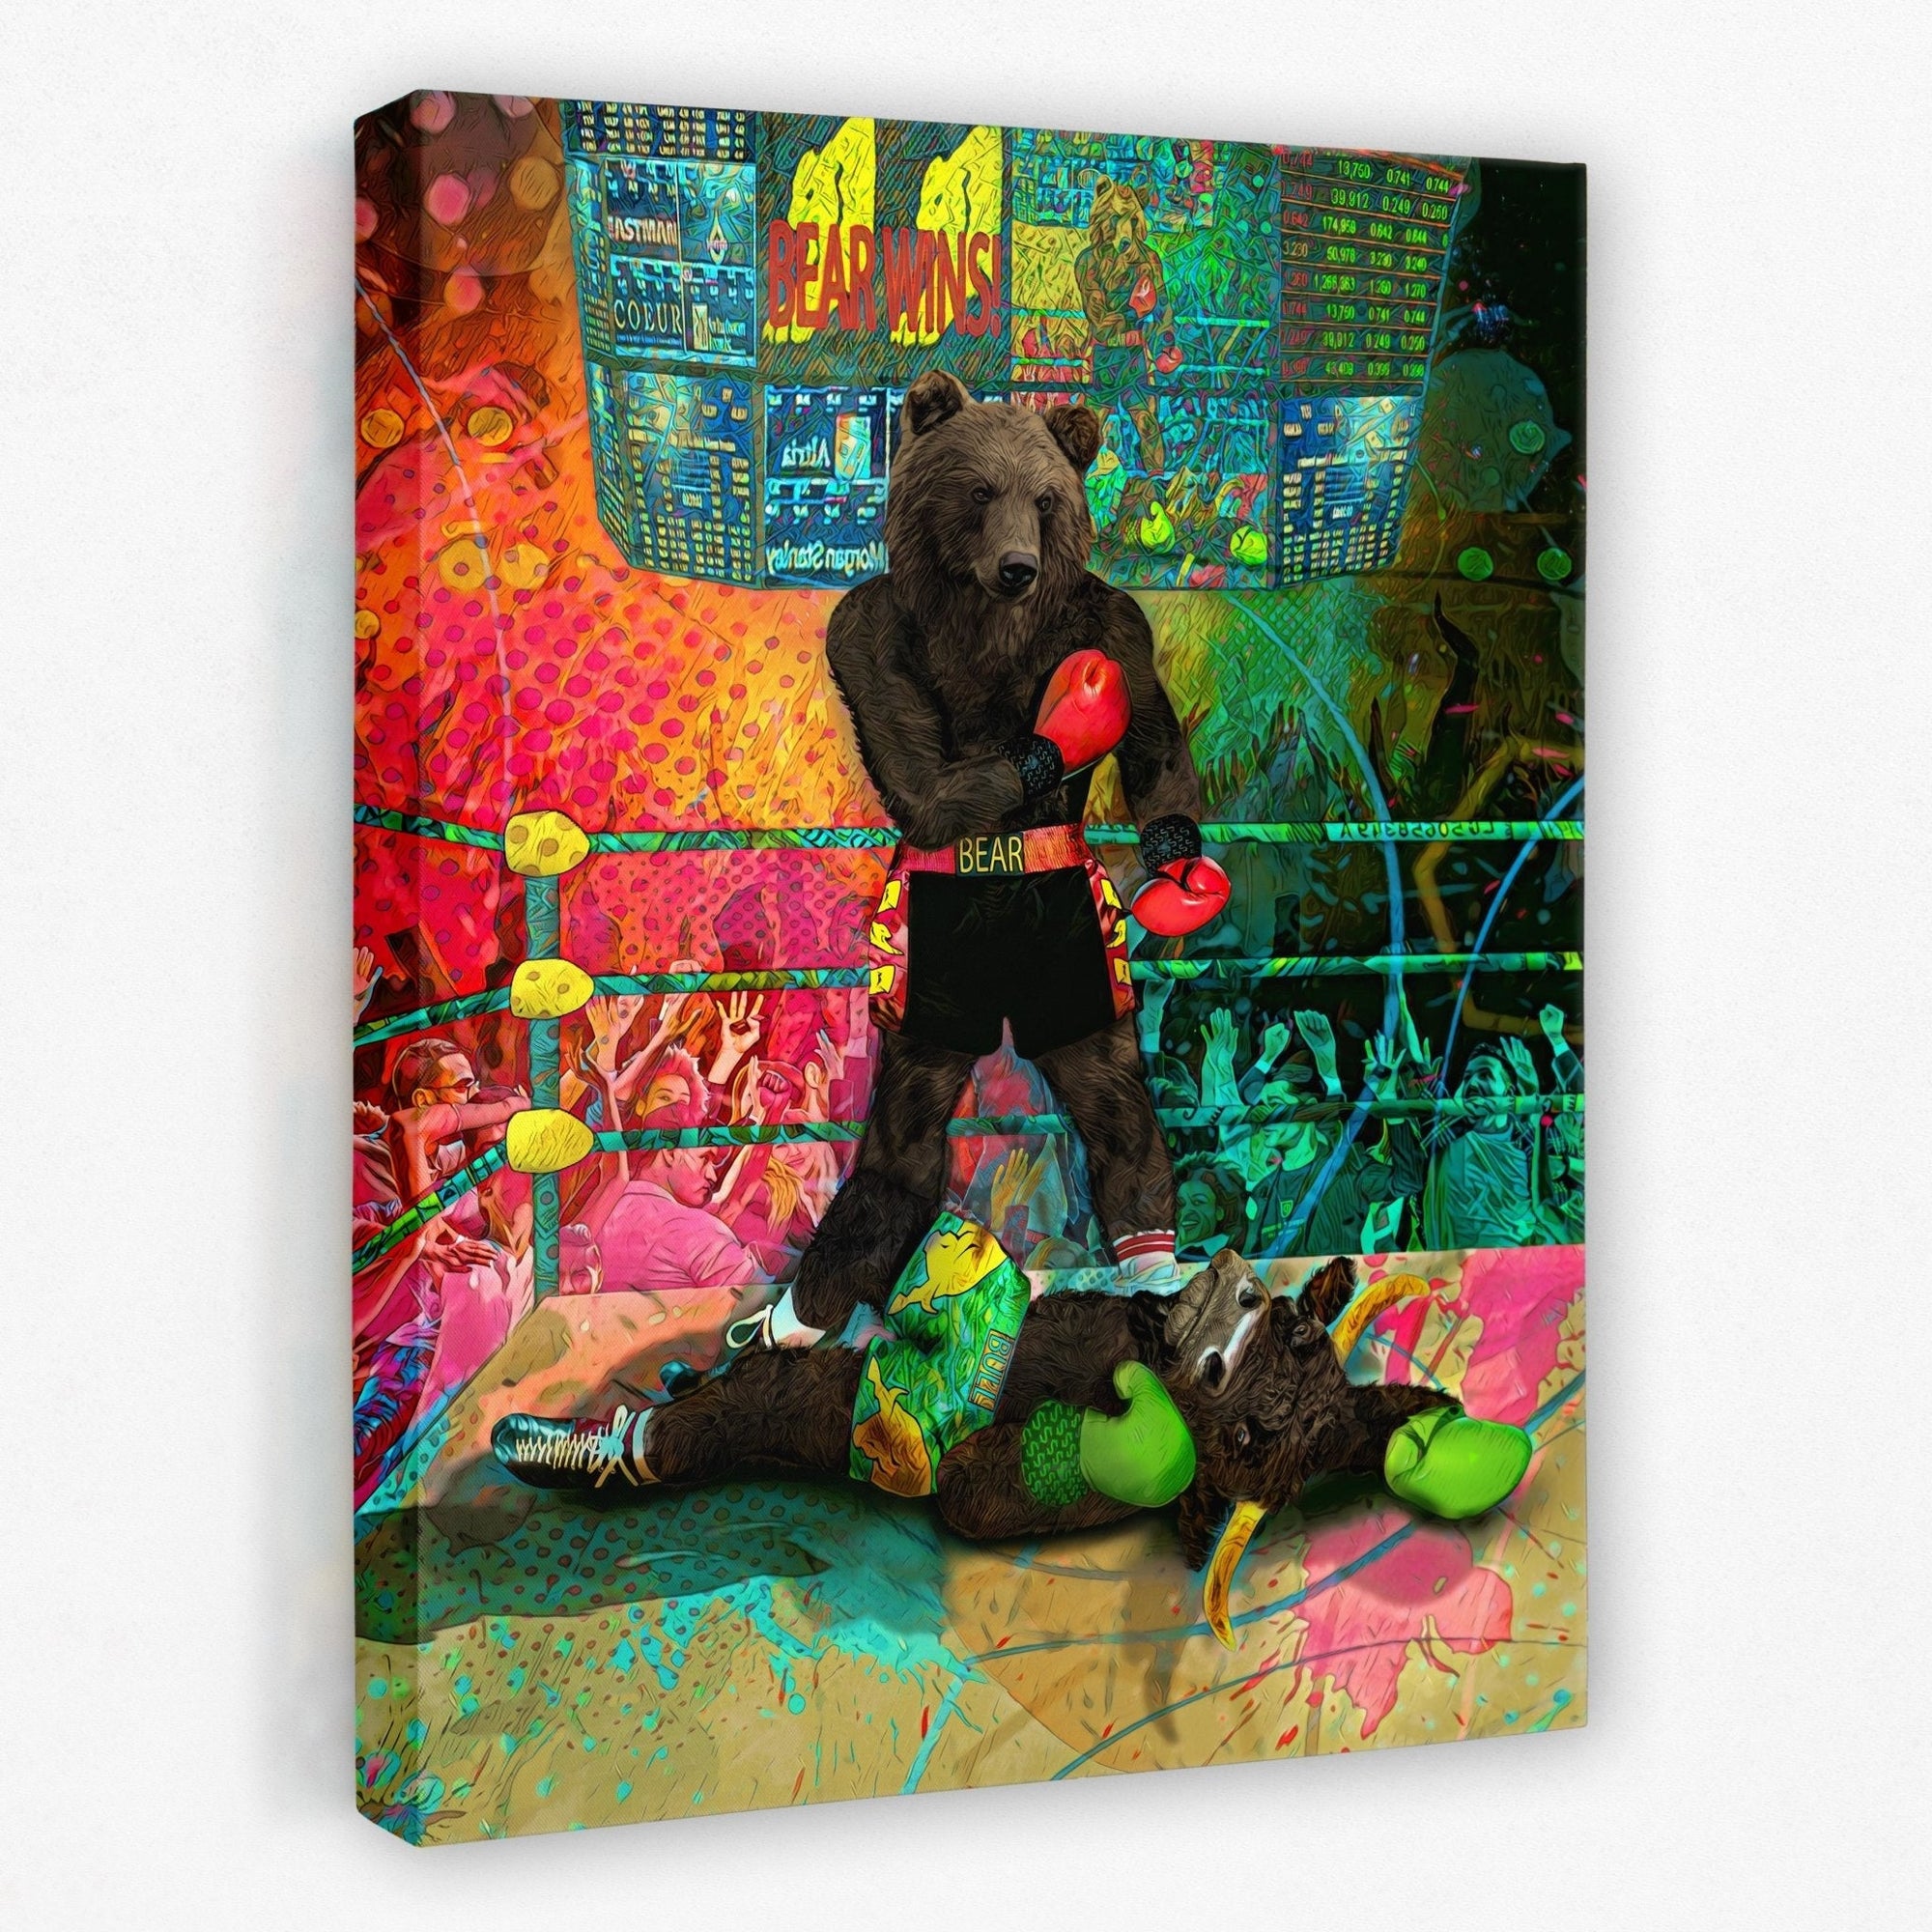 Bear Market - Thedopeart Canvas